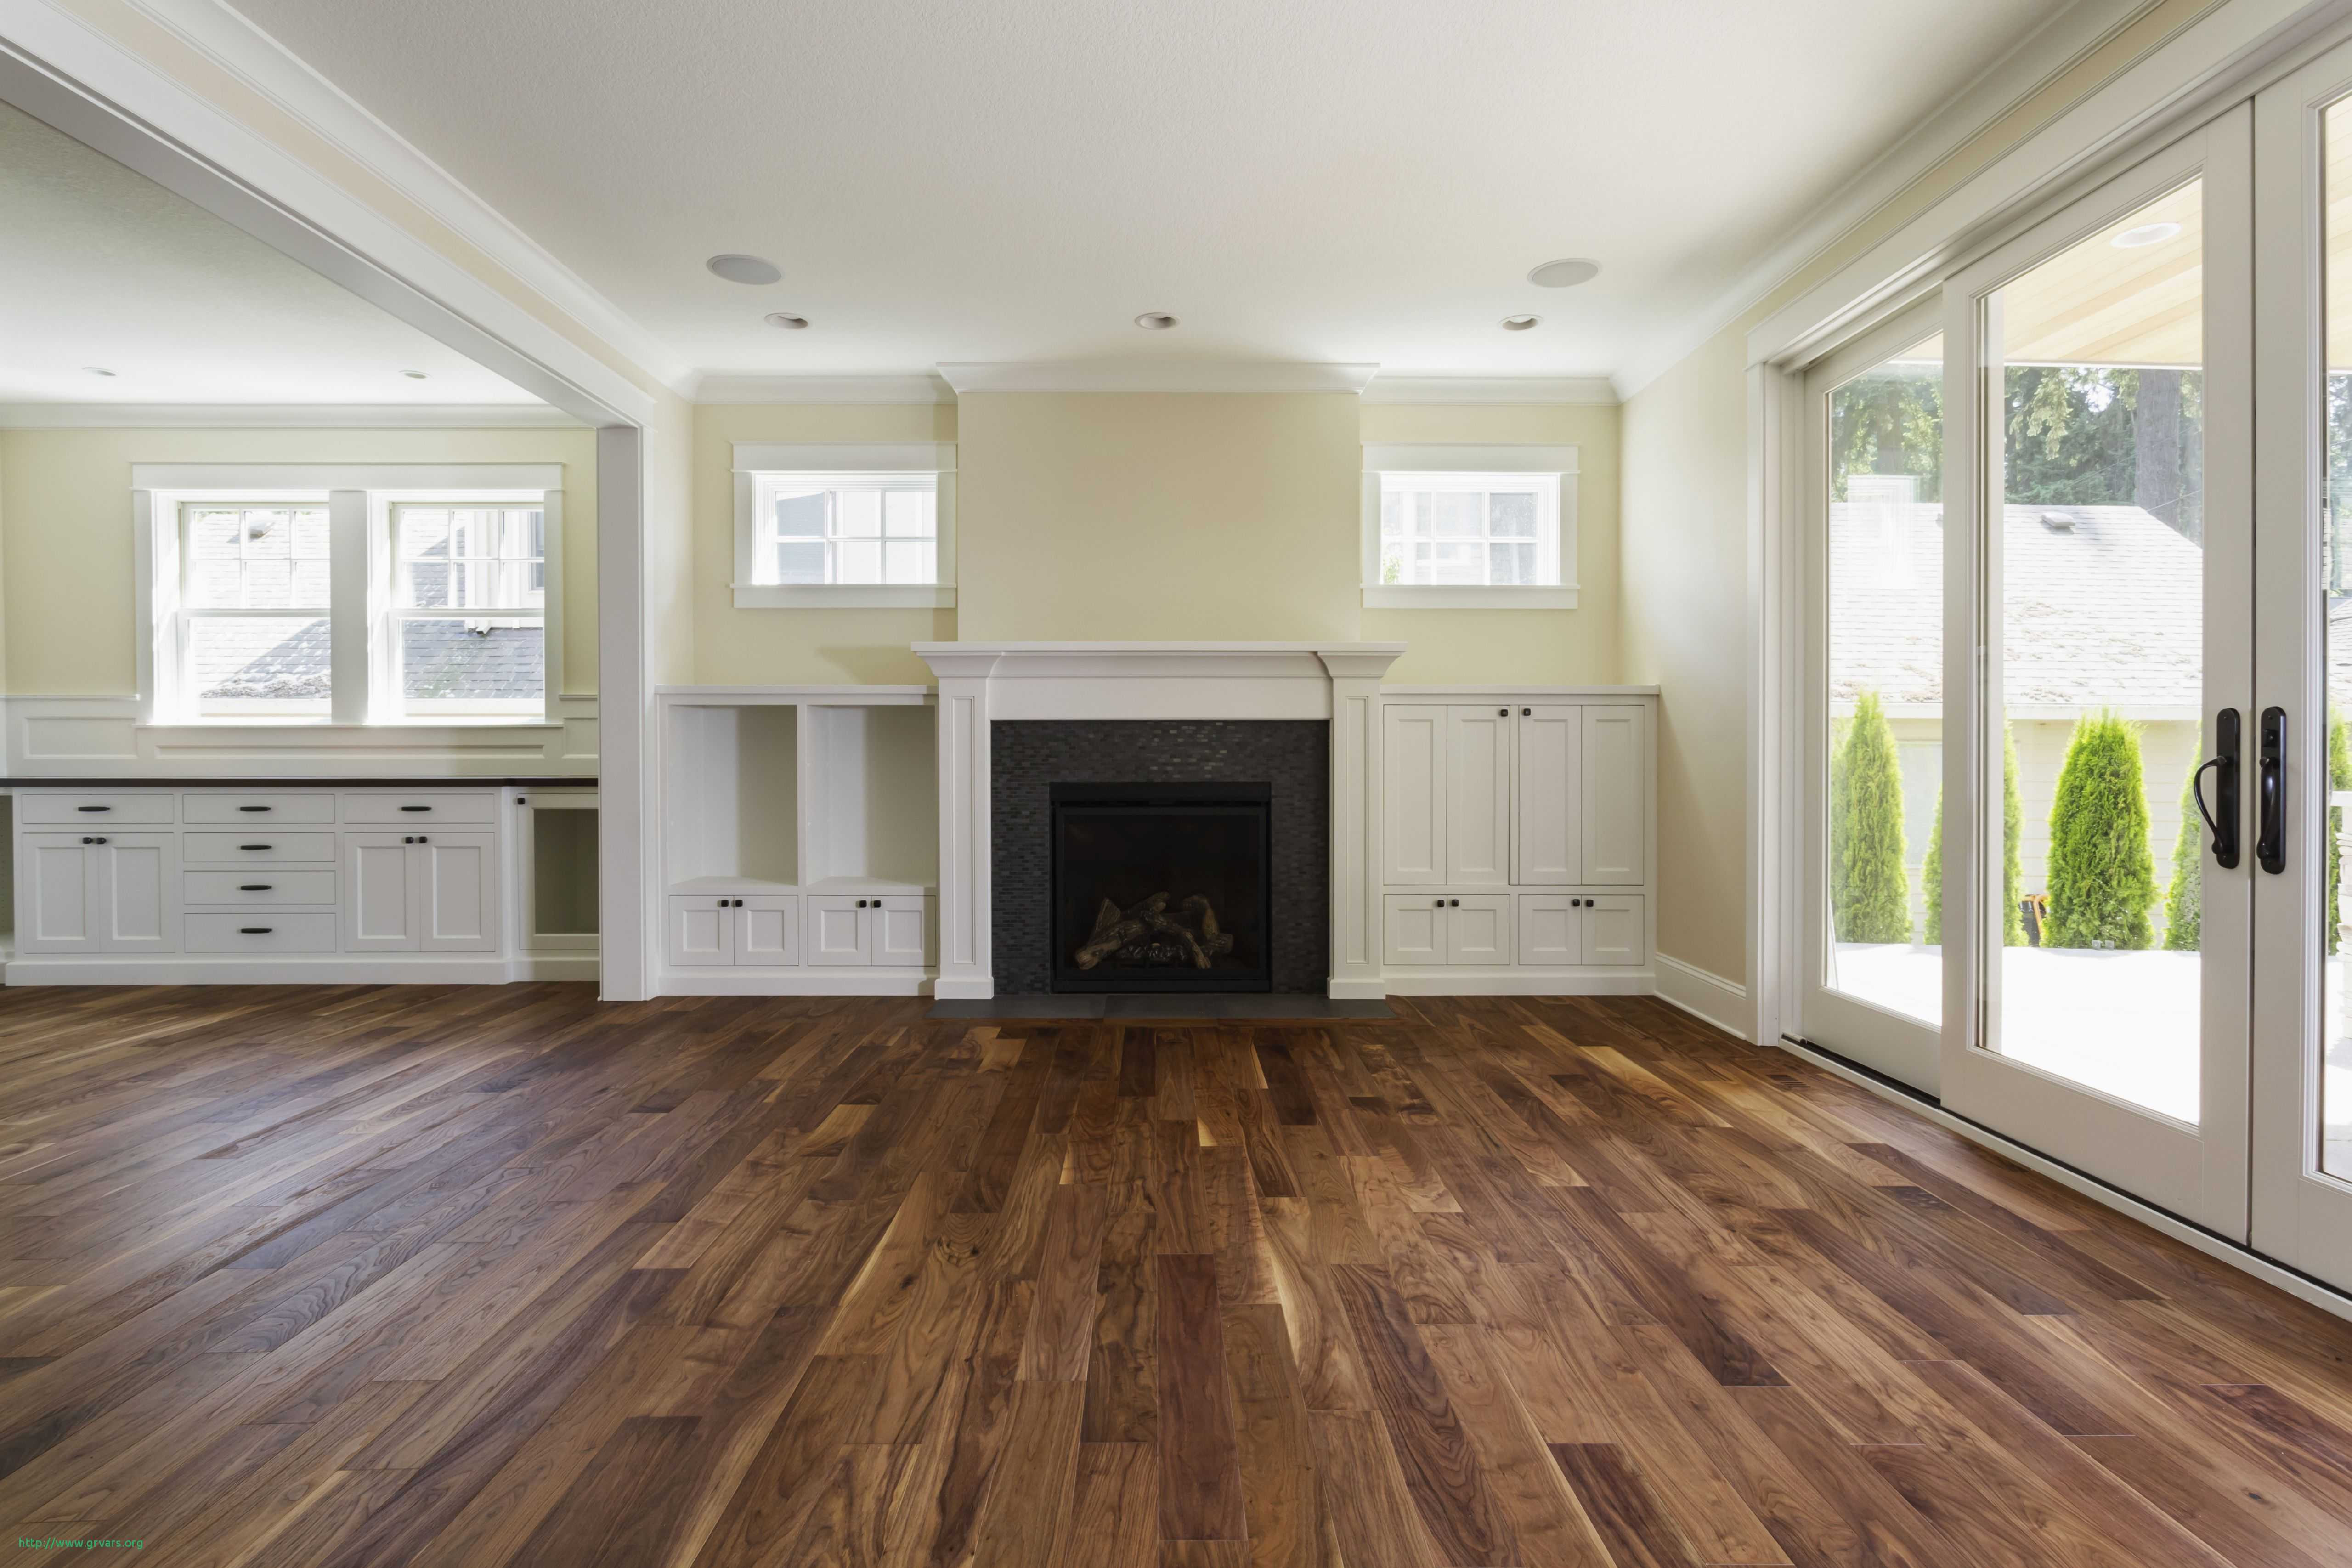 23 Great Hardwood Flooring 2016 2024 free download hardwood flooring 2016 of different types of flooring for living rooms unique hardwood floor in different types of flooring for living rooms impressionnant the pros and cons of prefinished h